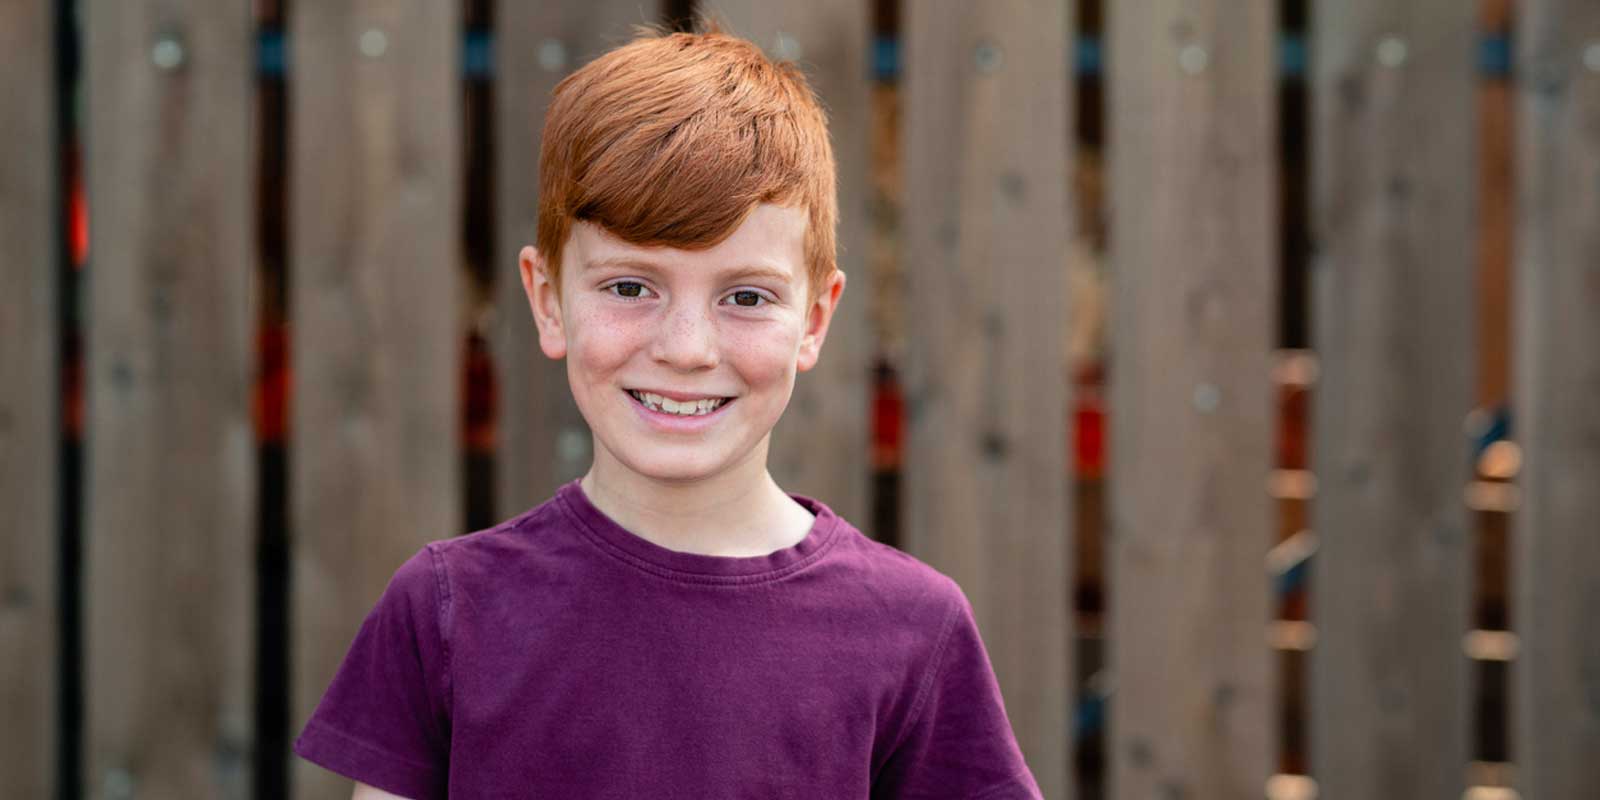 Smiling red haired boy